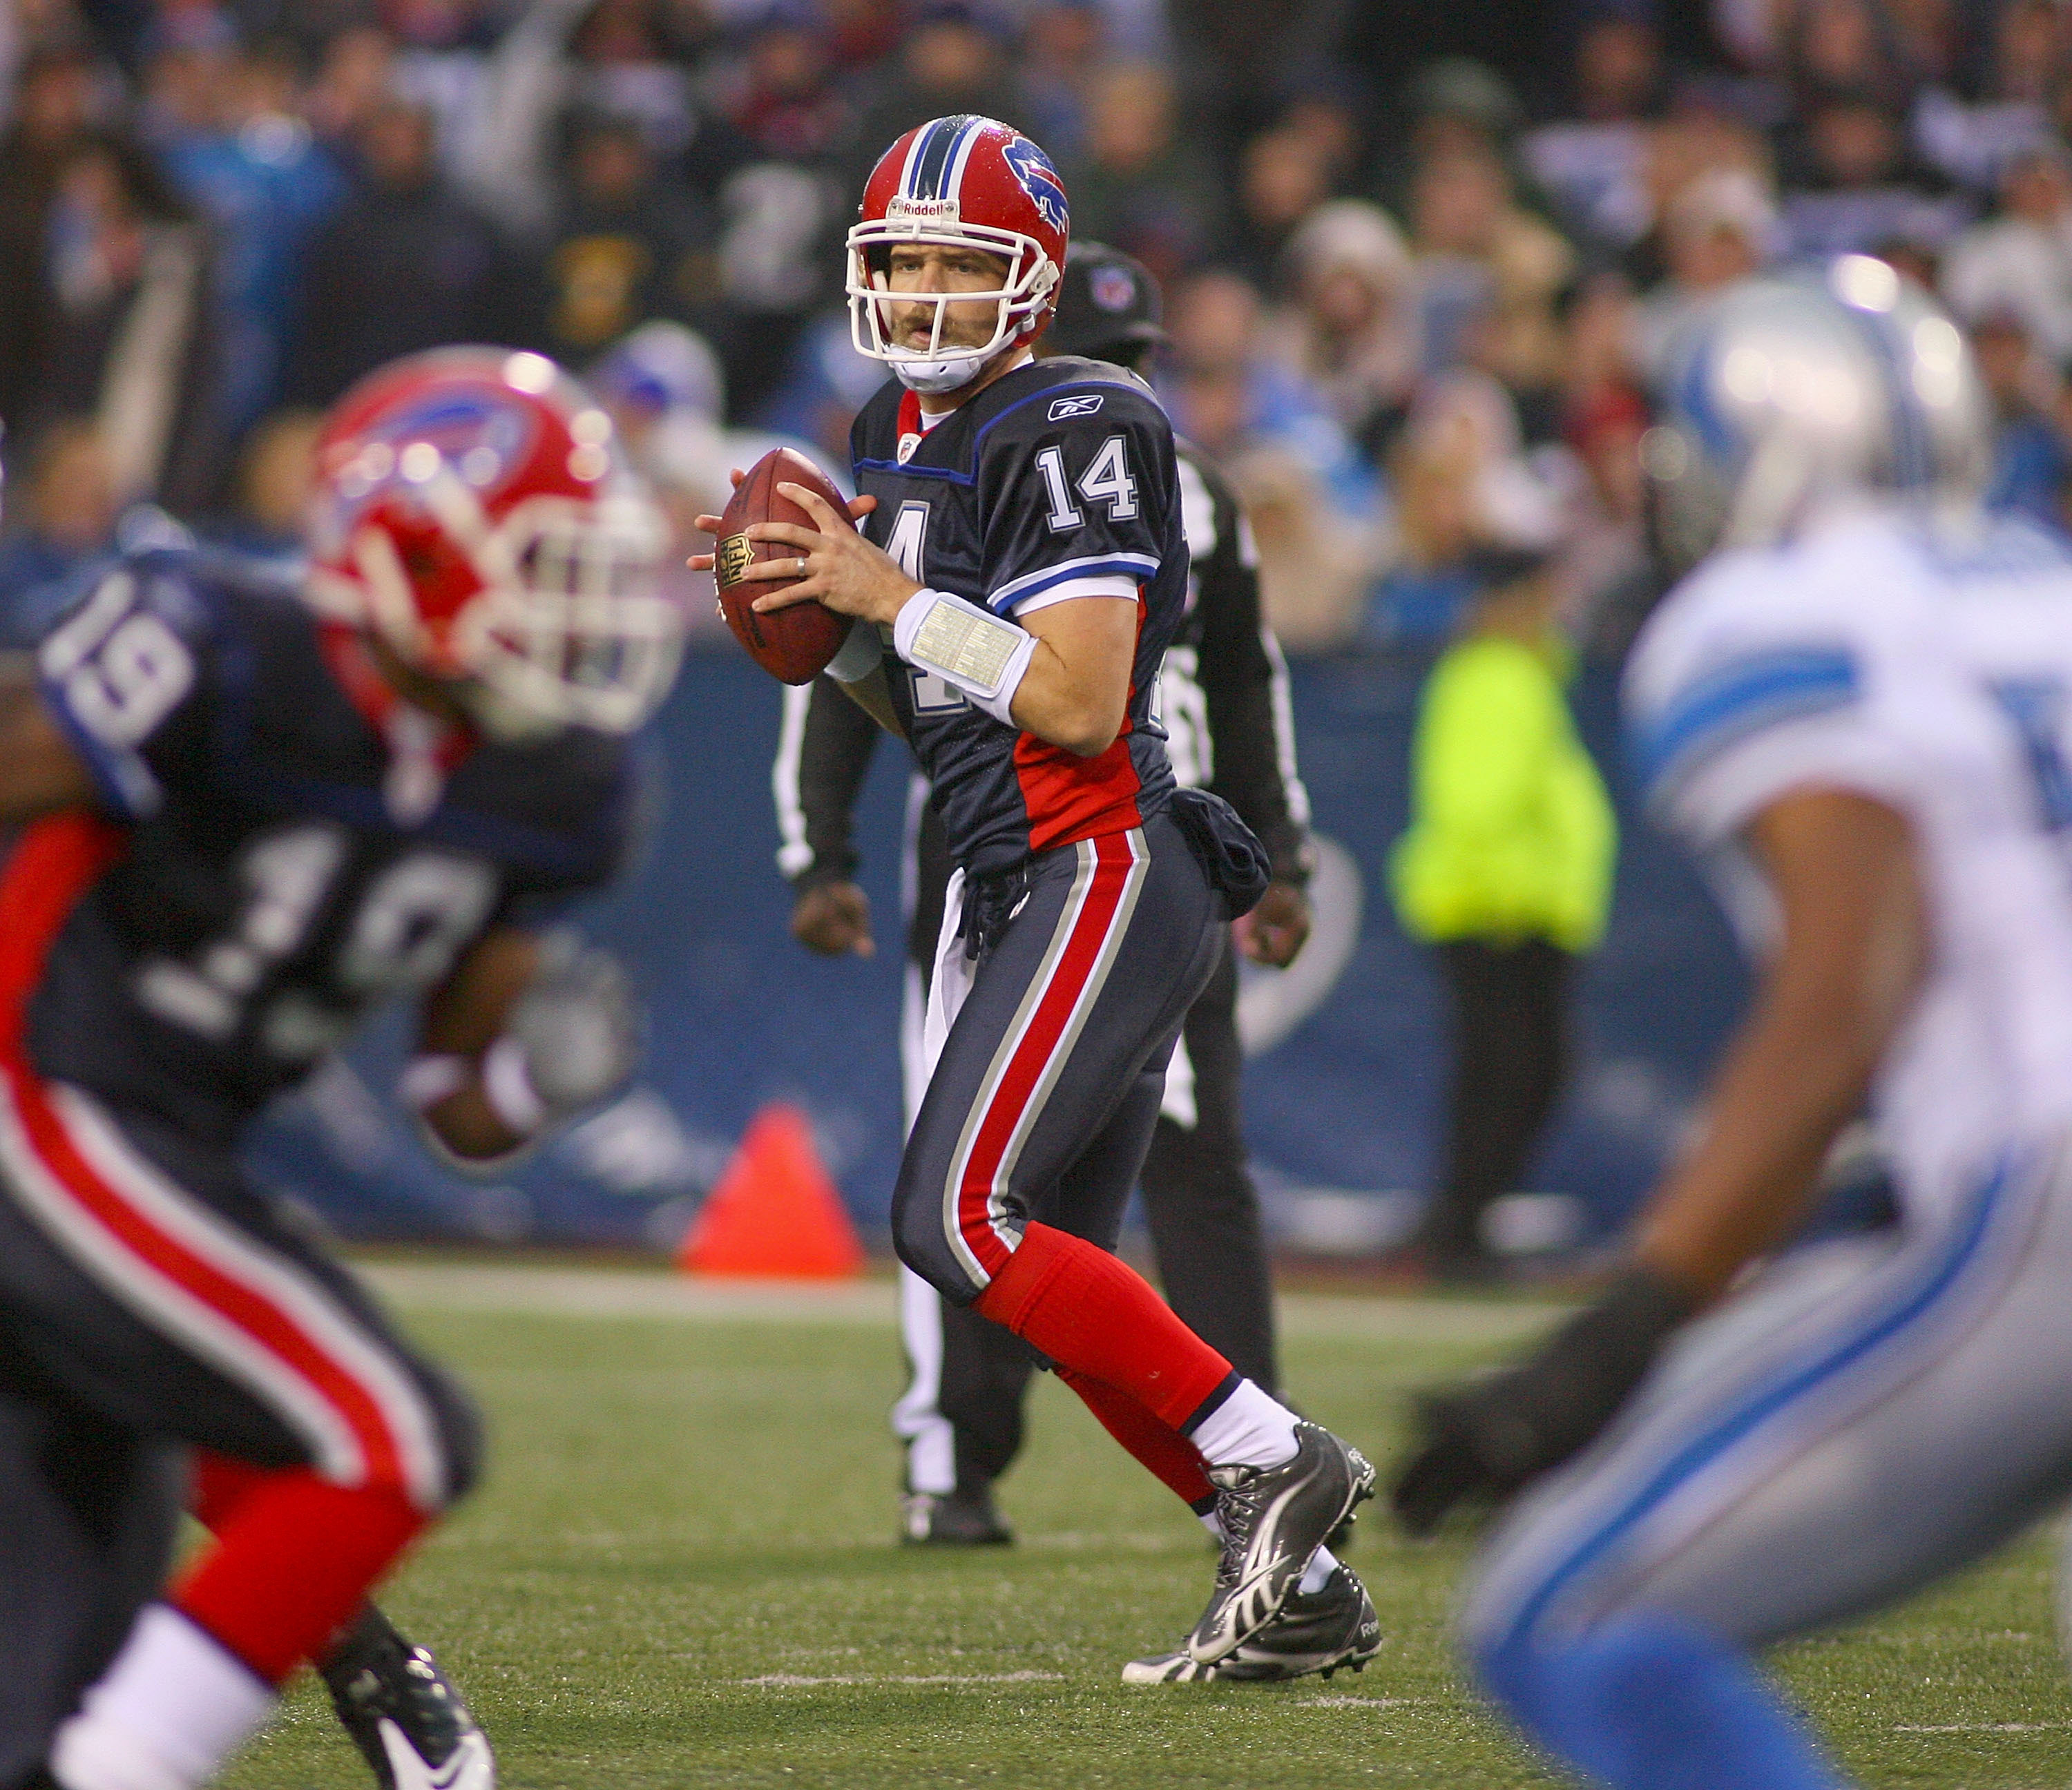 ORCHARD PARK, NY - NOVEMBER 14: Ryan Fitzpatrick #14 of the Buffalo Bills readies to throw against the Detroit Lions at Ralph Wilson Stadium on November 14, 2010 in Orchard Park, New York. Buffalo won 14-12. (Photo by Rick Stewart/Getty Images)